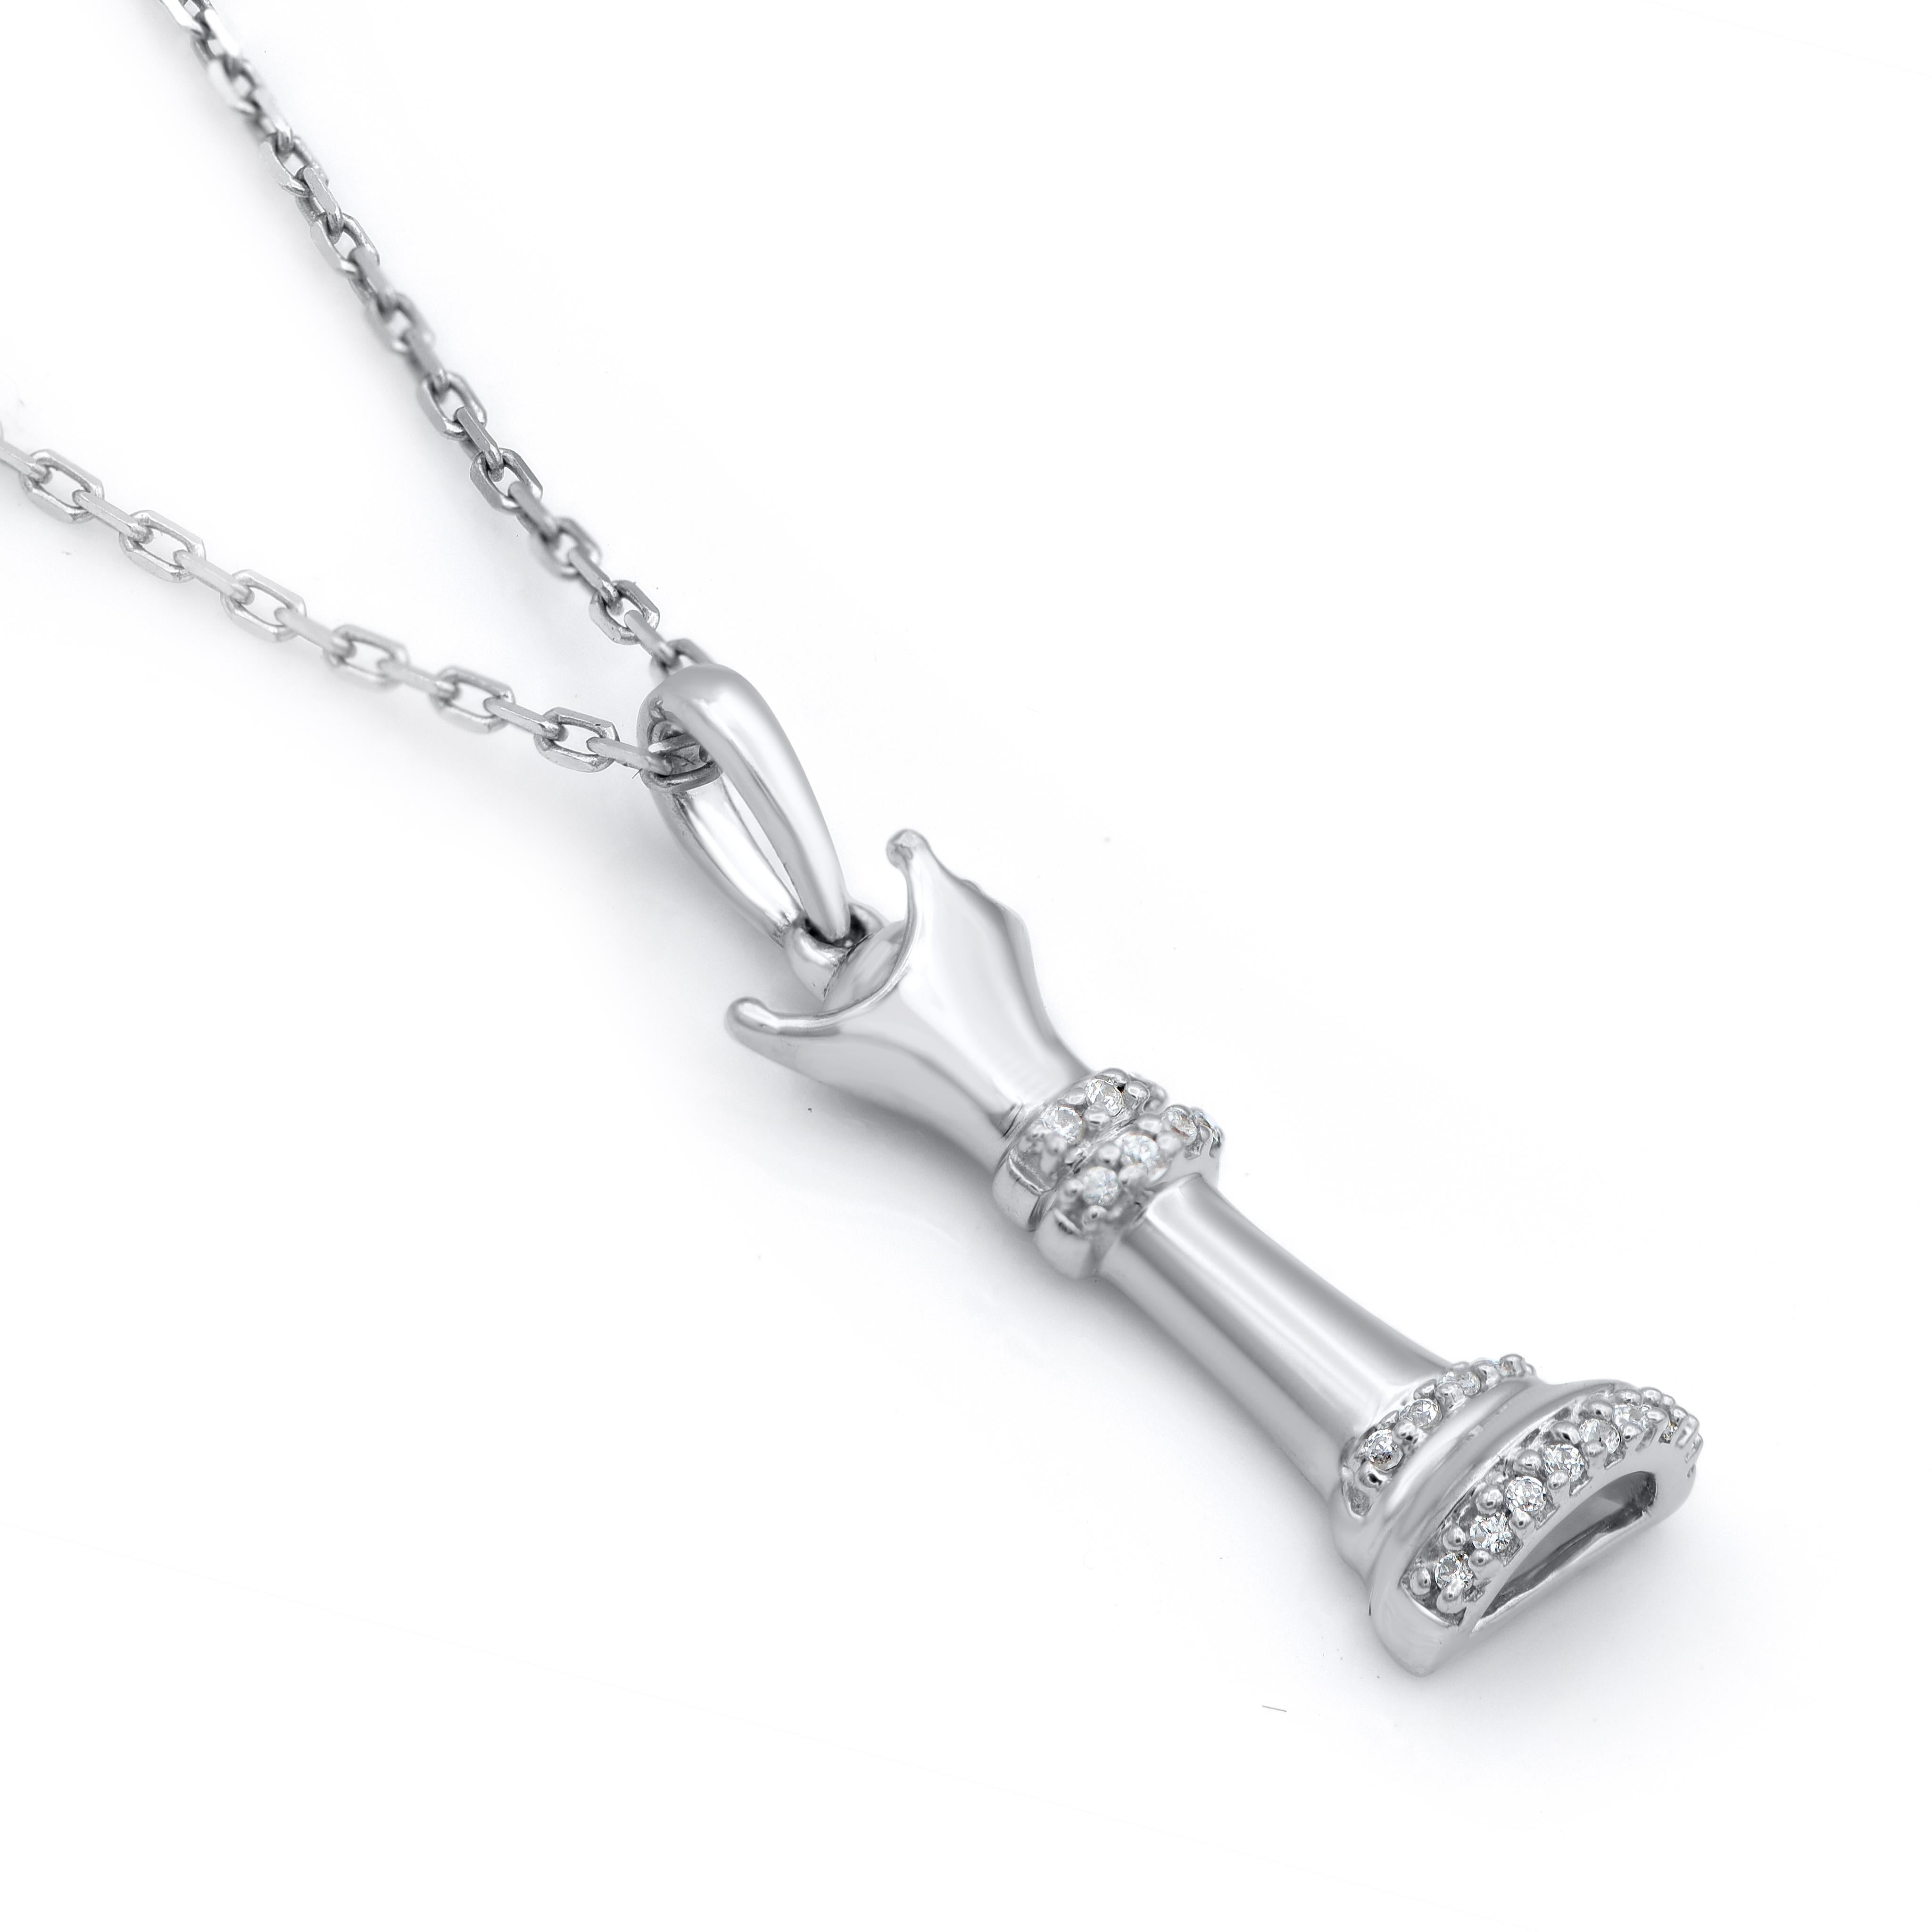 A striking addition when worn on its own, this diamond pendant makes a stunning impression. This king pendant is crafted from 14-karat white gold and features 21 single cut diamonds set in prong setting. H-I color I2 clarity and a high polish finish